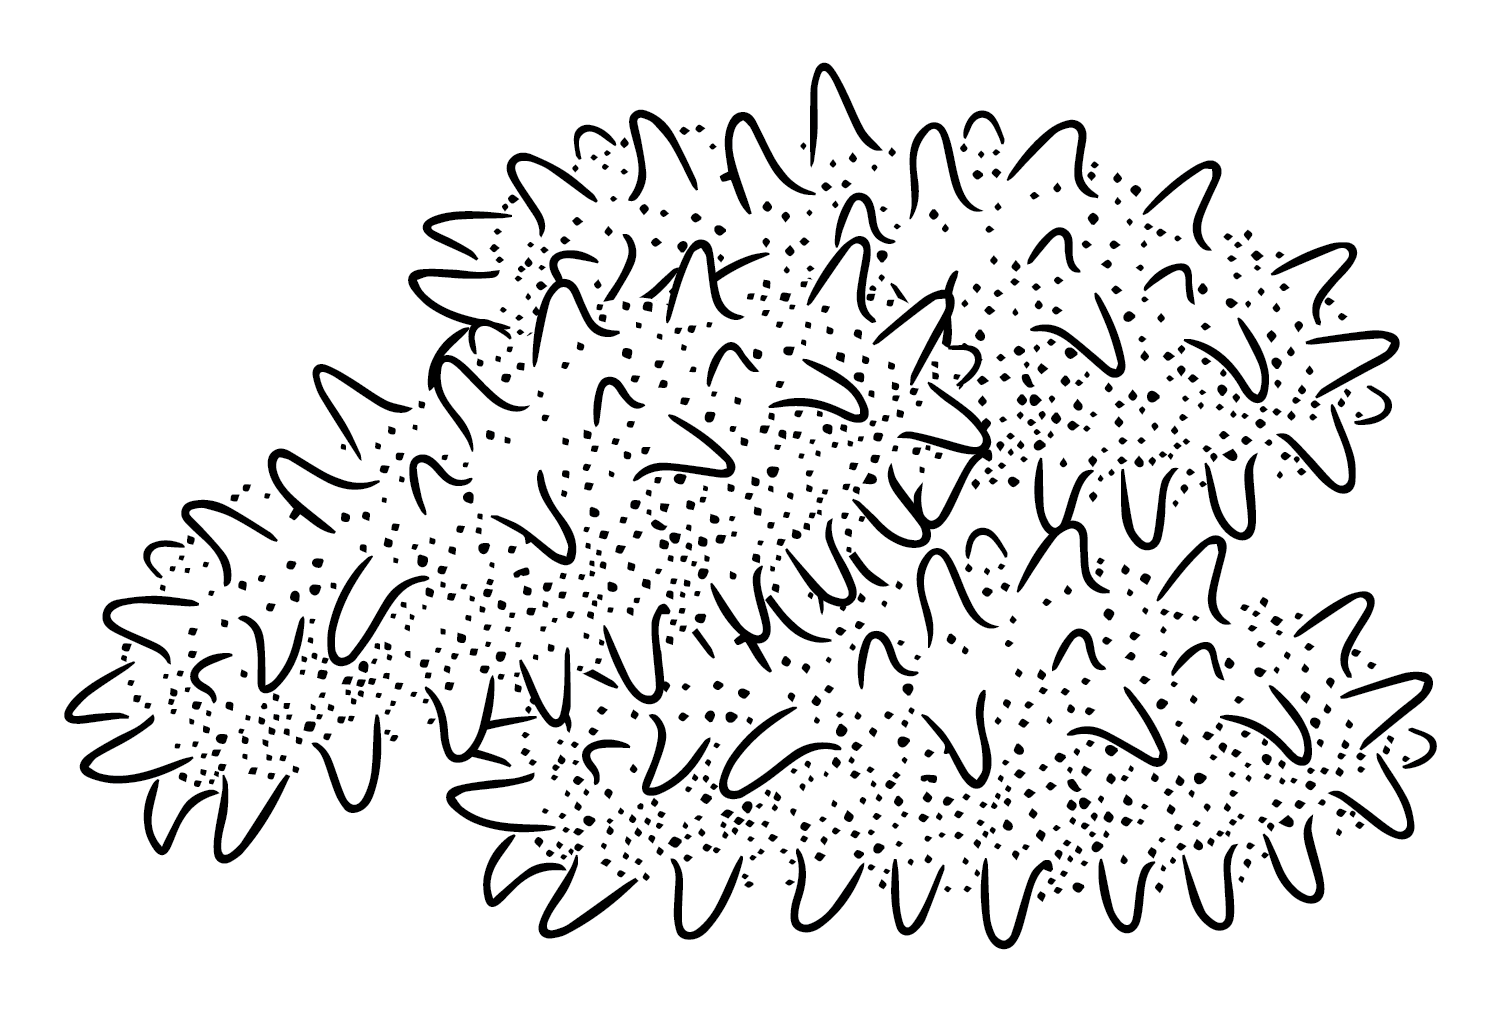 The Sea Cucumber Coloring Page - Free Printable Coloring Pages